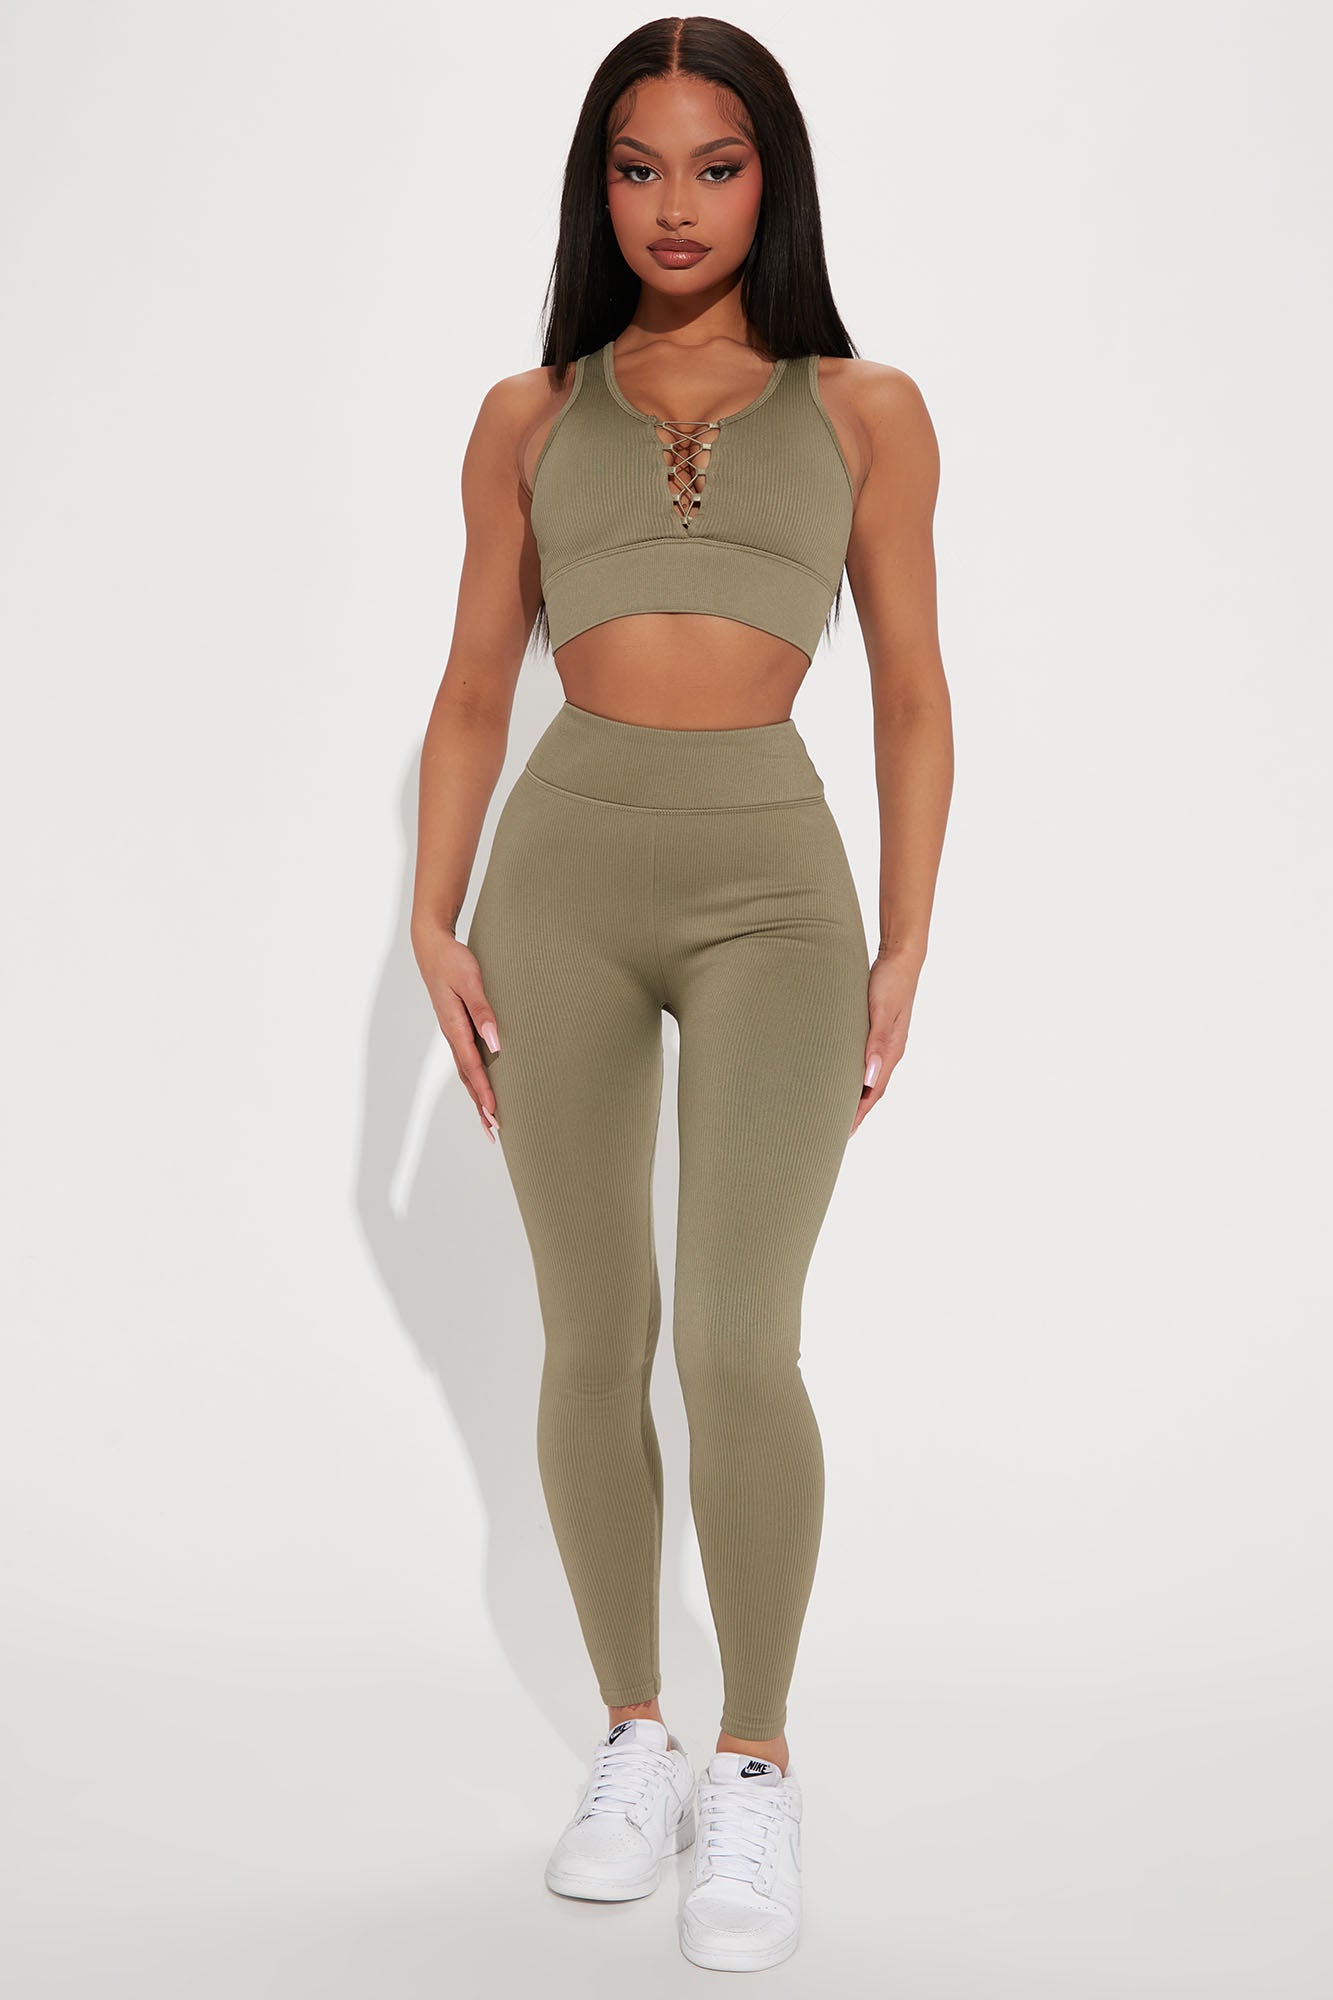 Get Up And Go Seamless Top - Olive